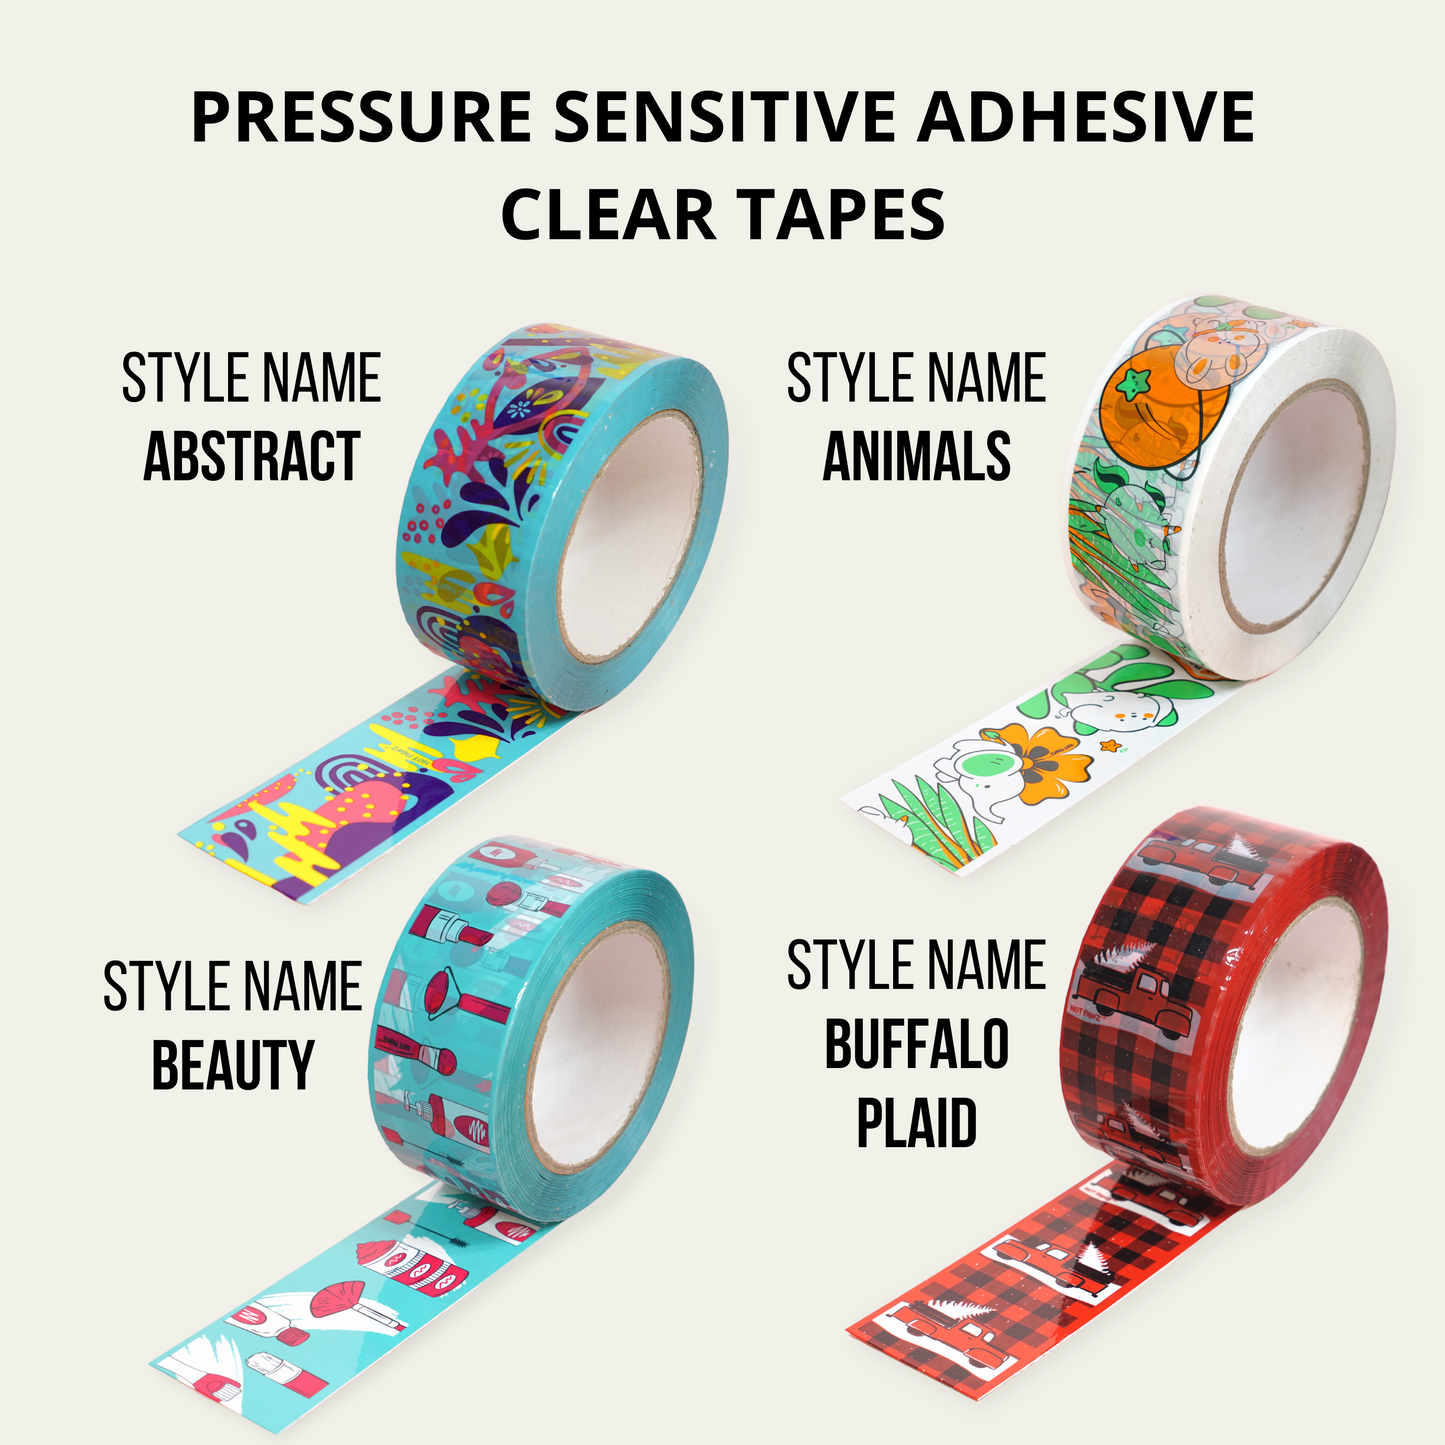 Hot Pawz Decorative Packing Tape Packaging Tape Heavy-duty Tape